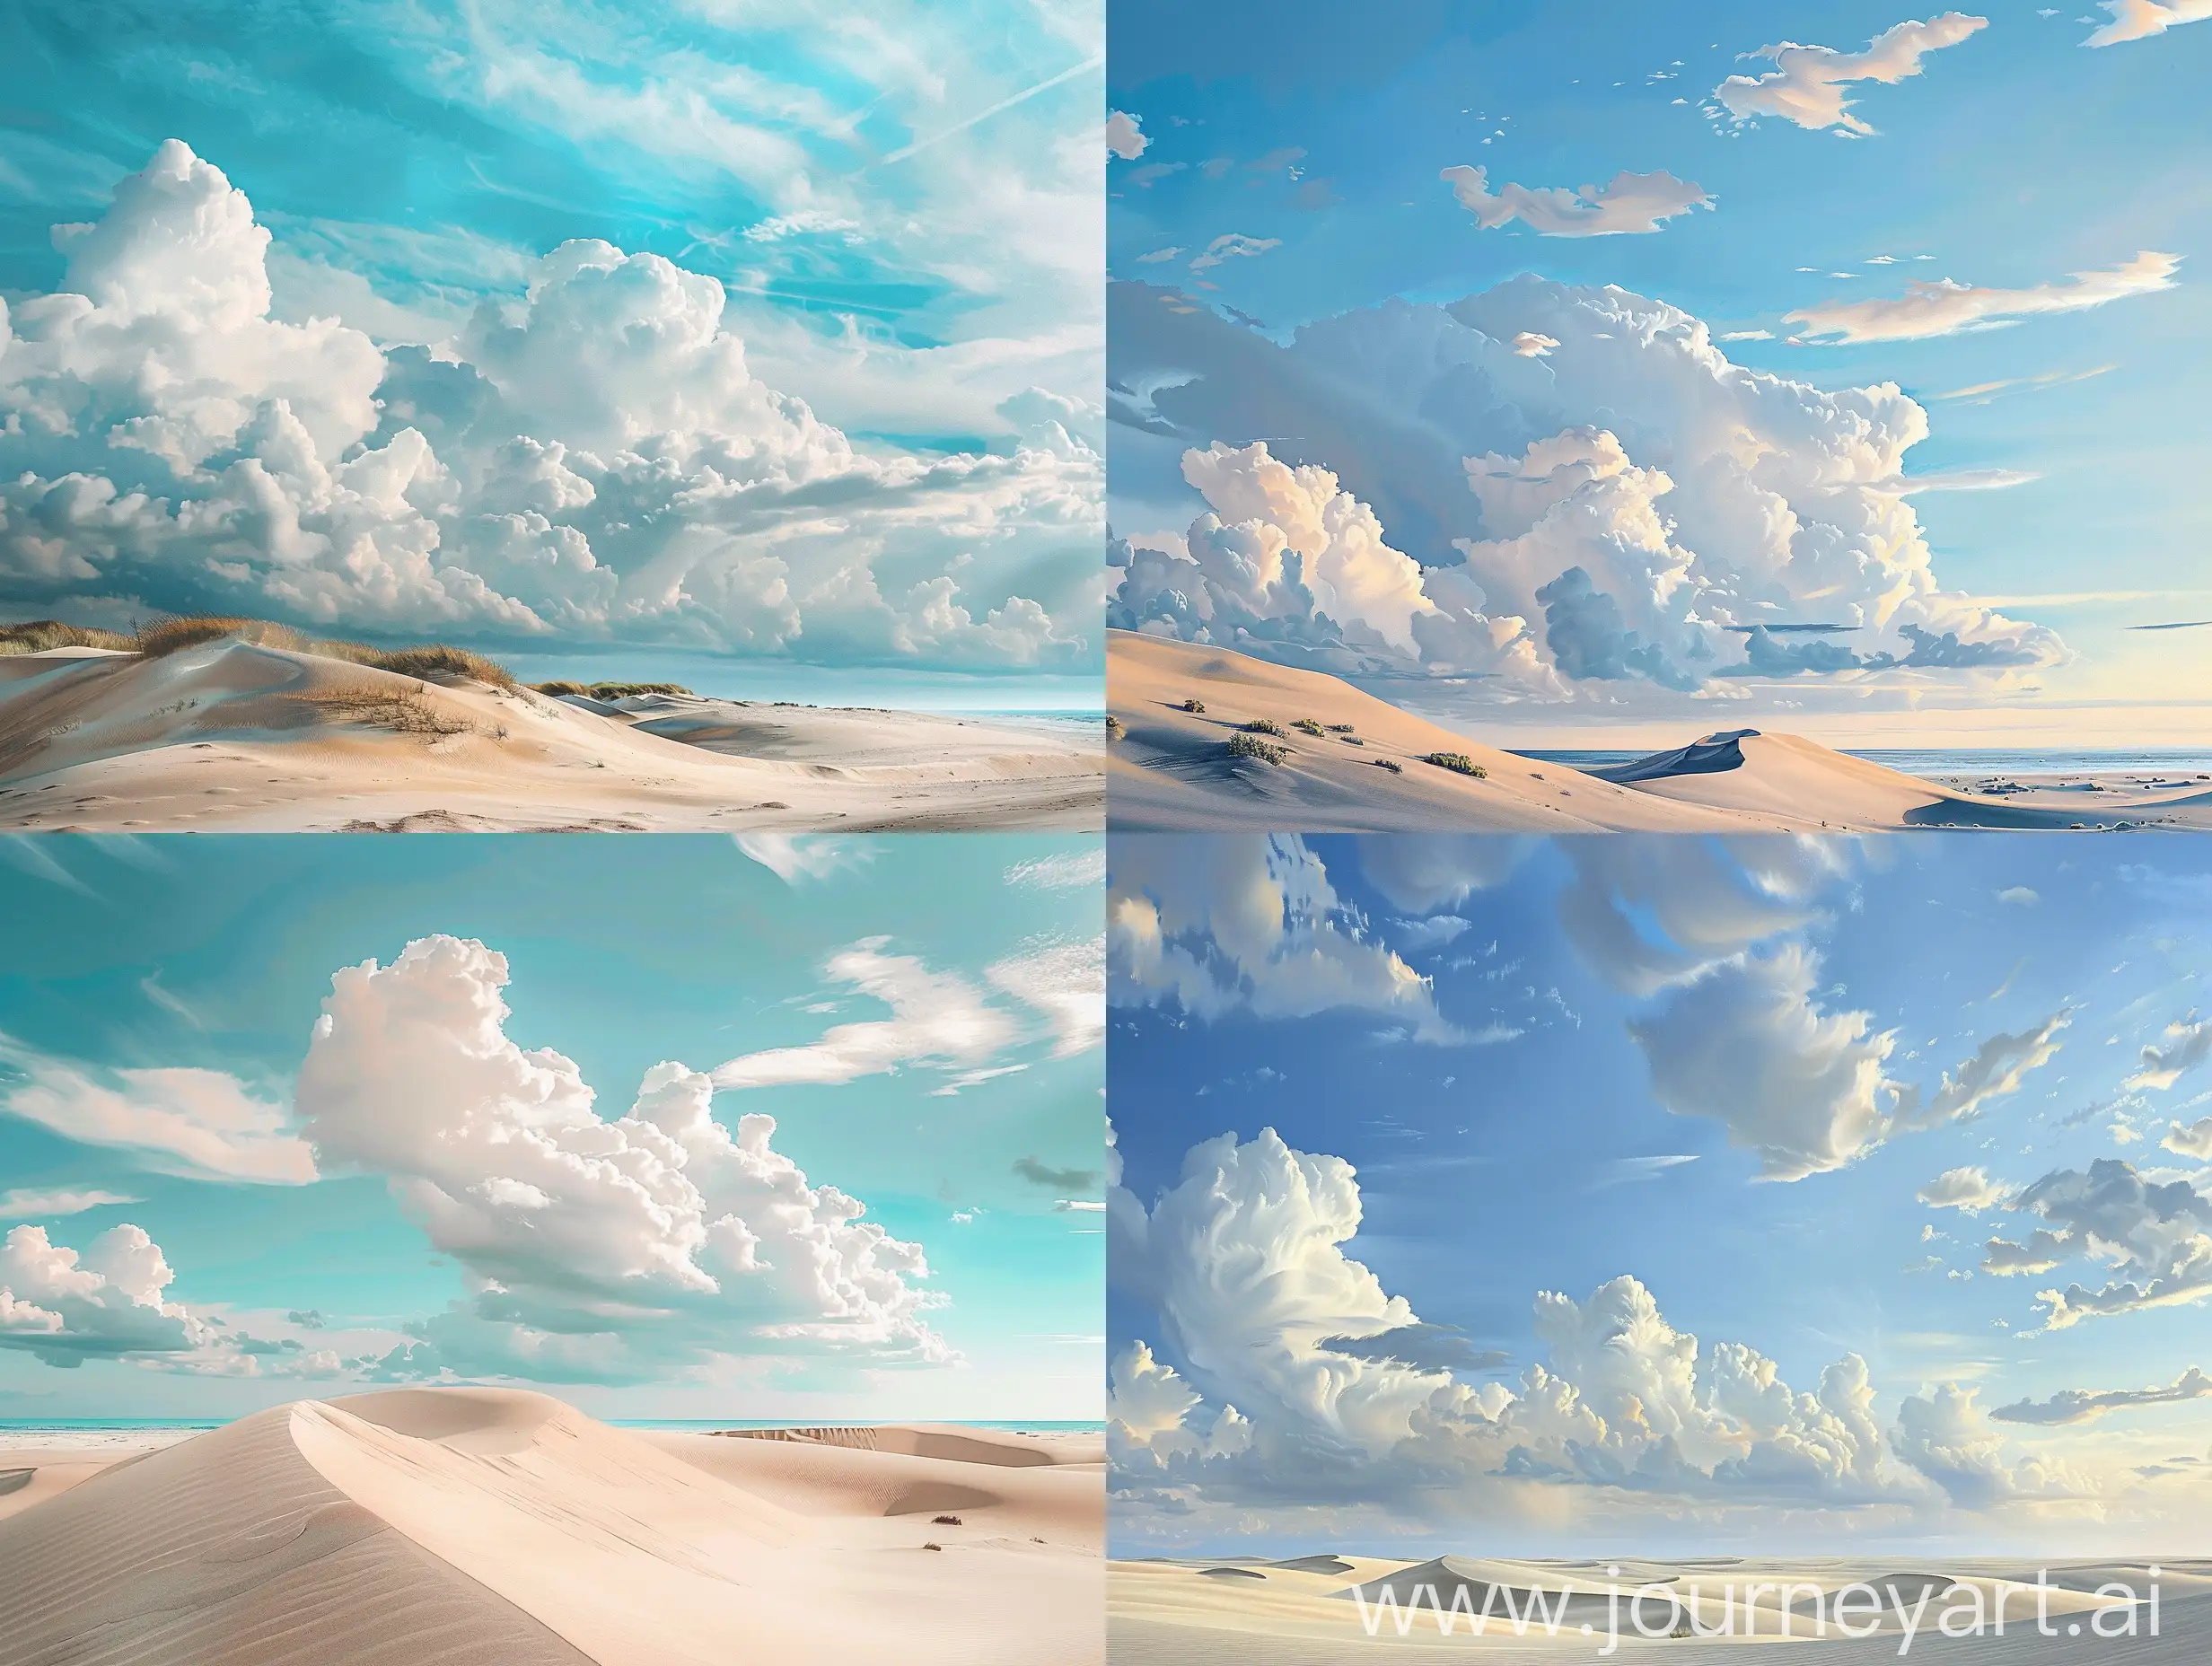 photo of the peaceful and serene beauty of sand dunes with large cumulus clouds and a beautiful blue sky. Using muted colors creates a feeling of harmony and relaxation. The low horizon gives the painting a sense of immensity, creating a sense of immersion in the scene. sophistication, tranquility, calm neutral colors, highest quality photos, no filters, 4k